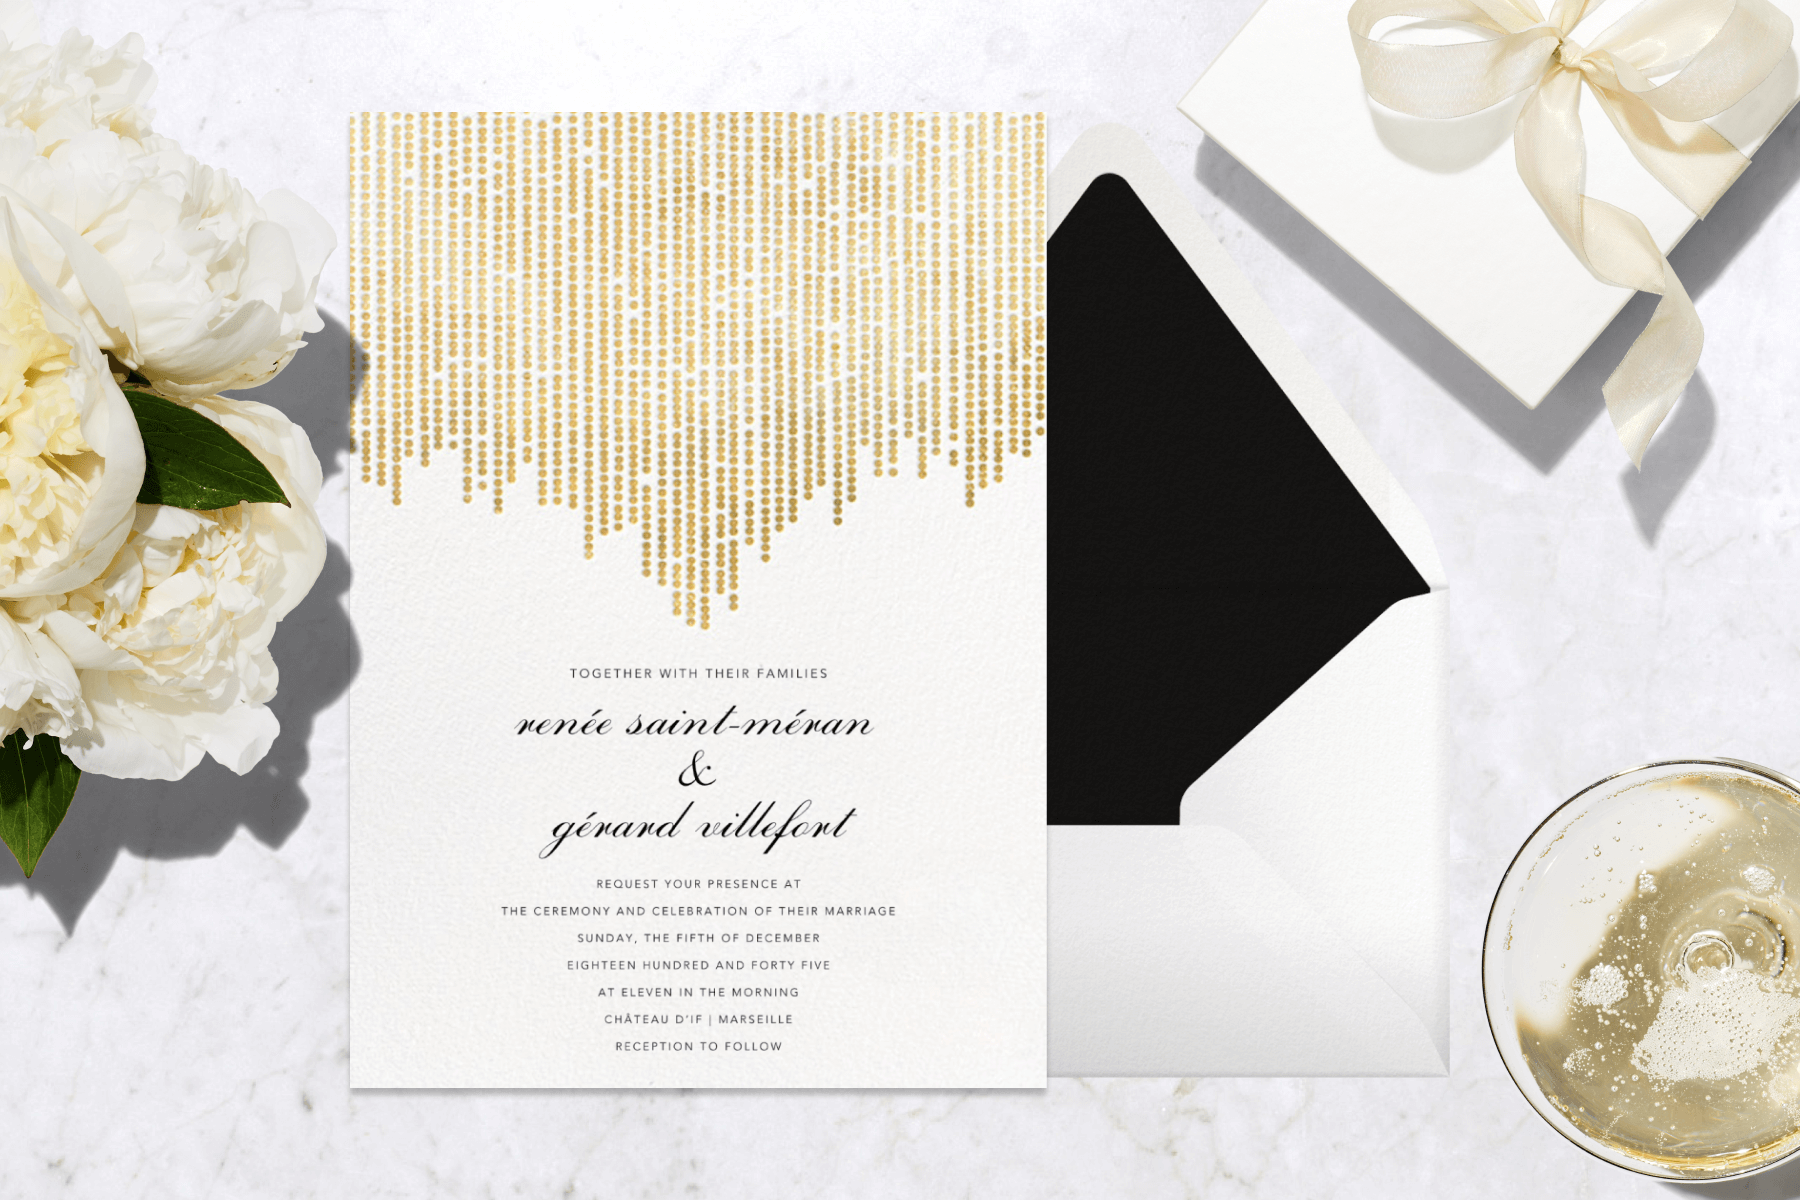 A white and gold wedding invitation surrounded by flowers, a present, and a glass of champagne.